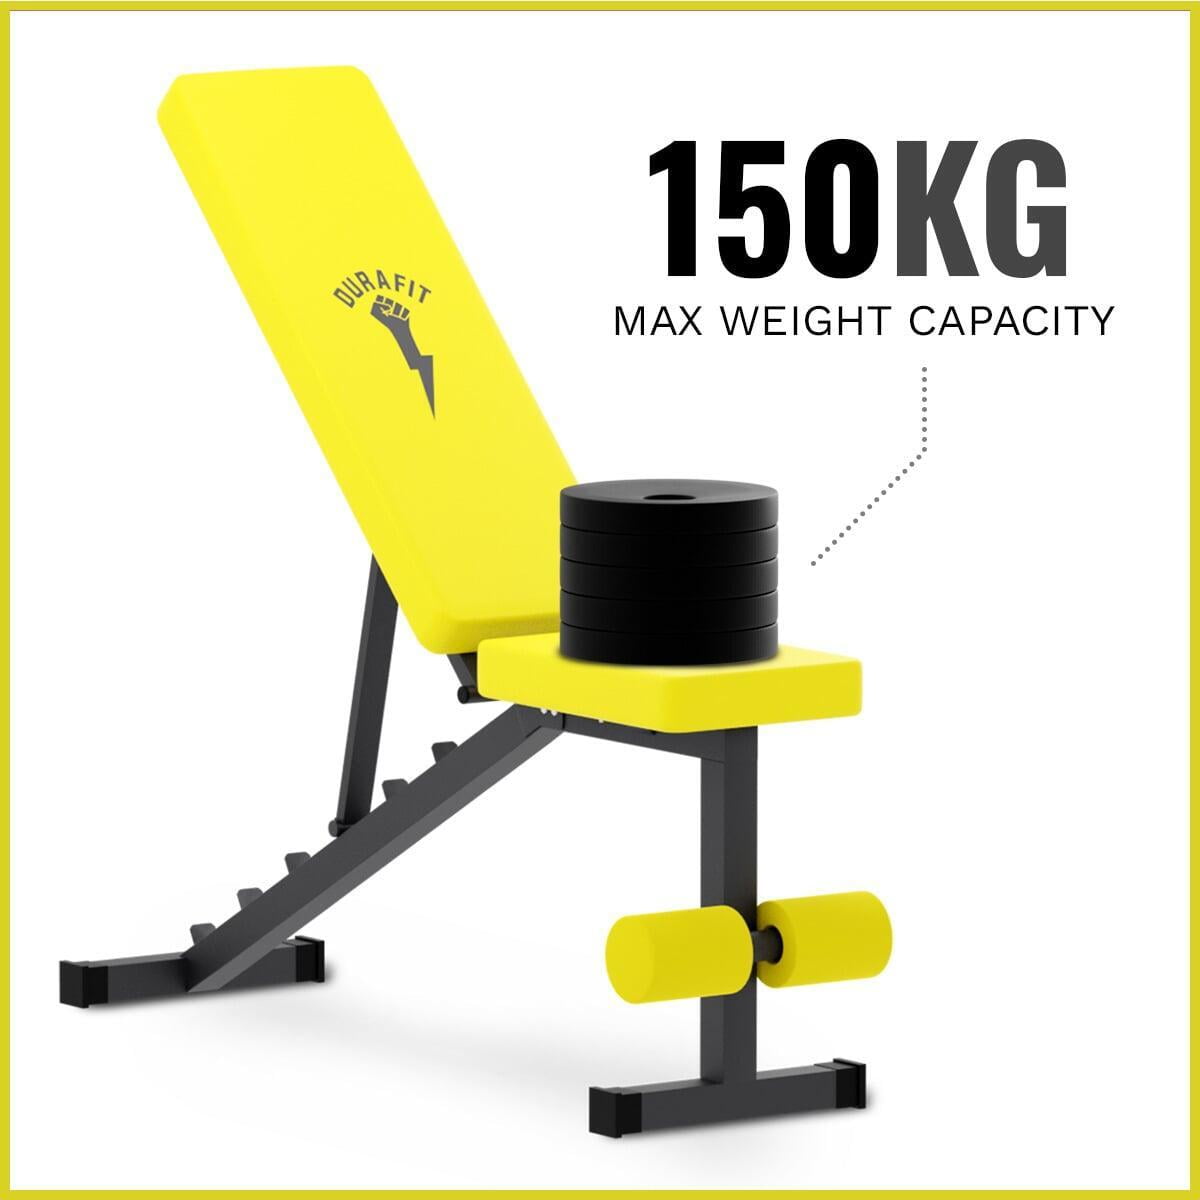 Durafit Foldable Bench FB01 with Max User Weight of 150kg